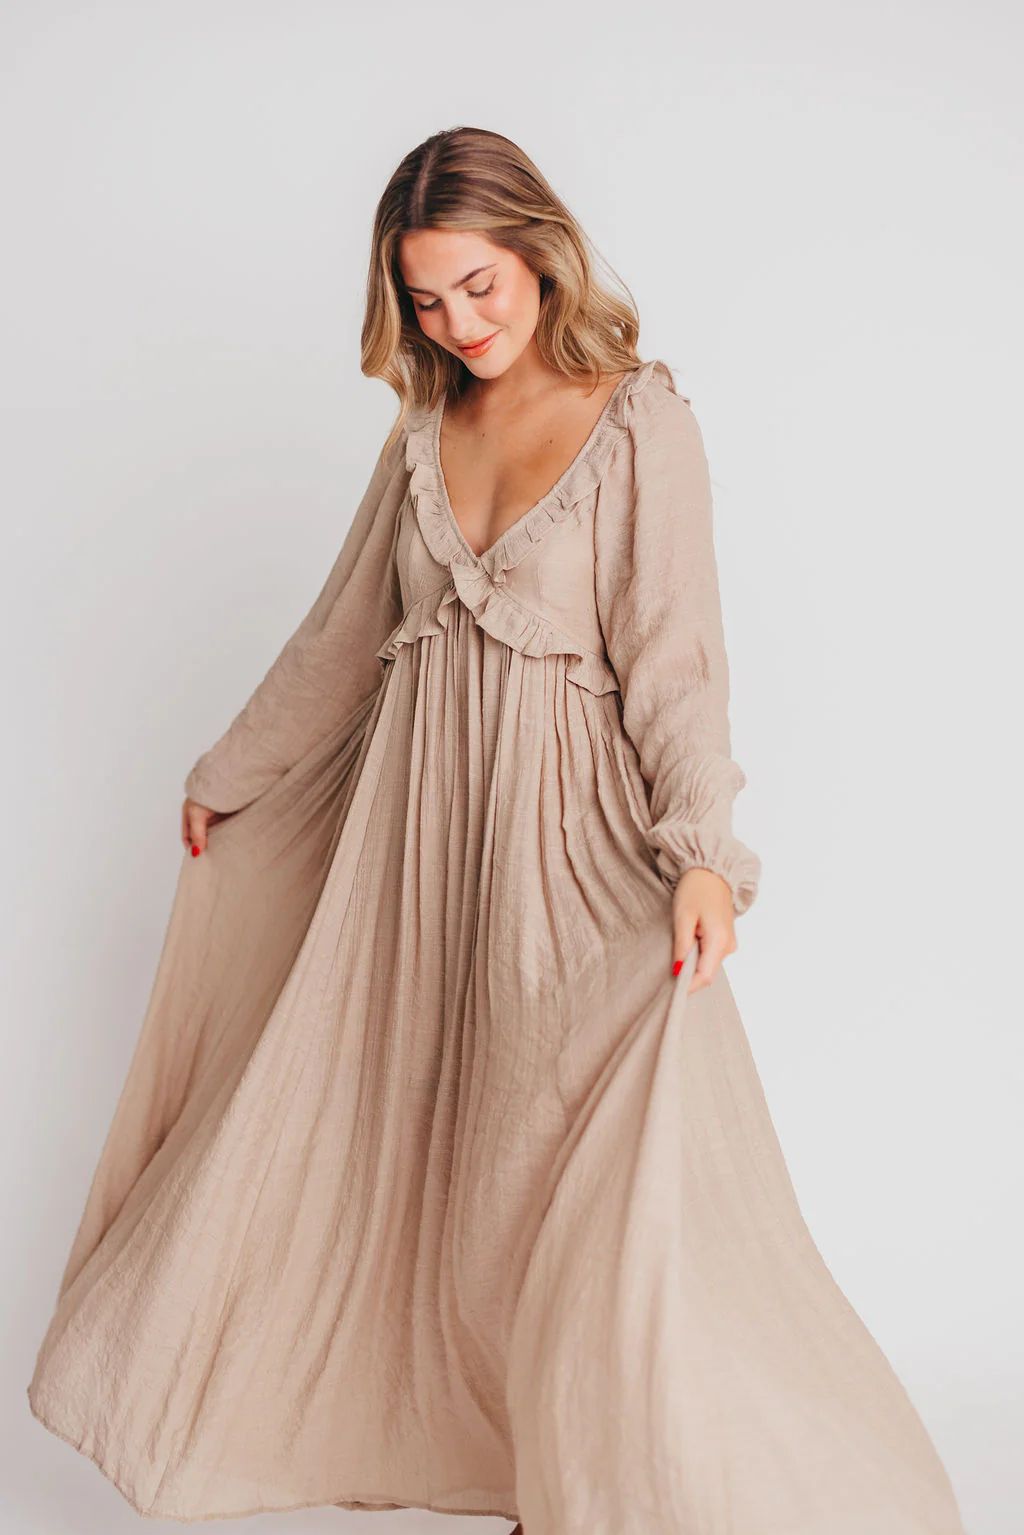 Let It Be Ruffled Maxi Dress with Plunging Neckline in Sand - Bump Fri | Worth Collective